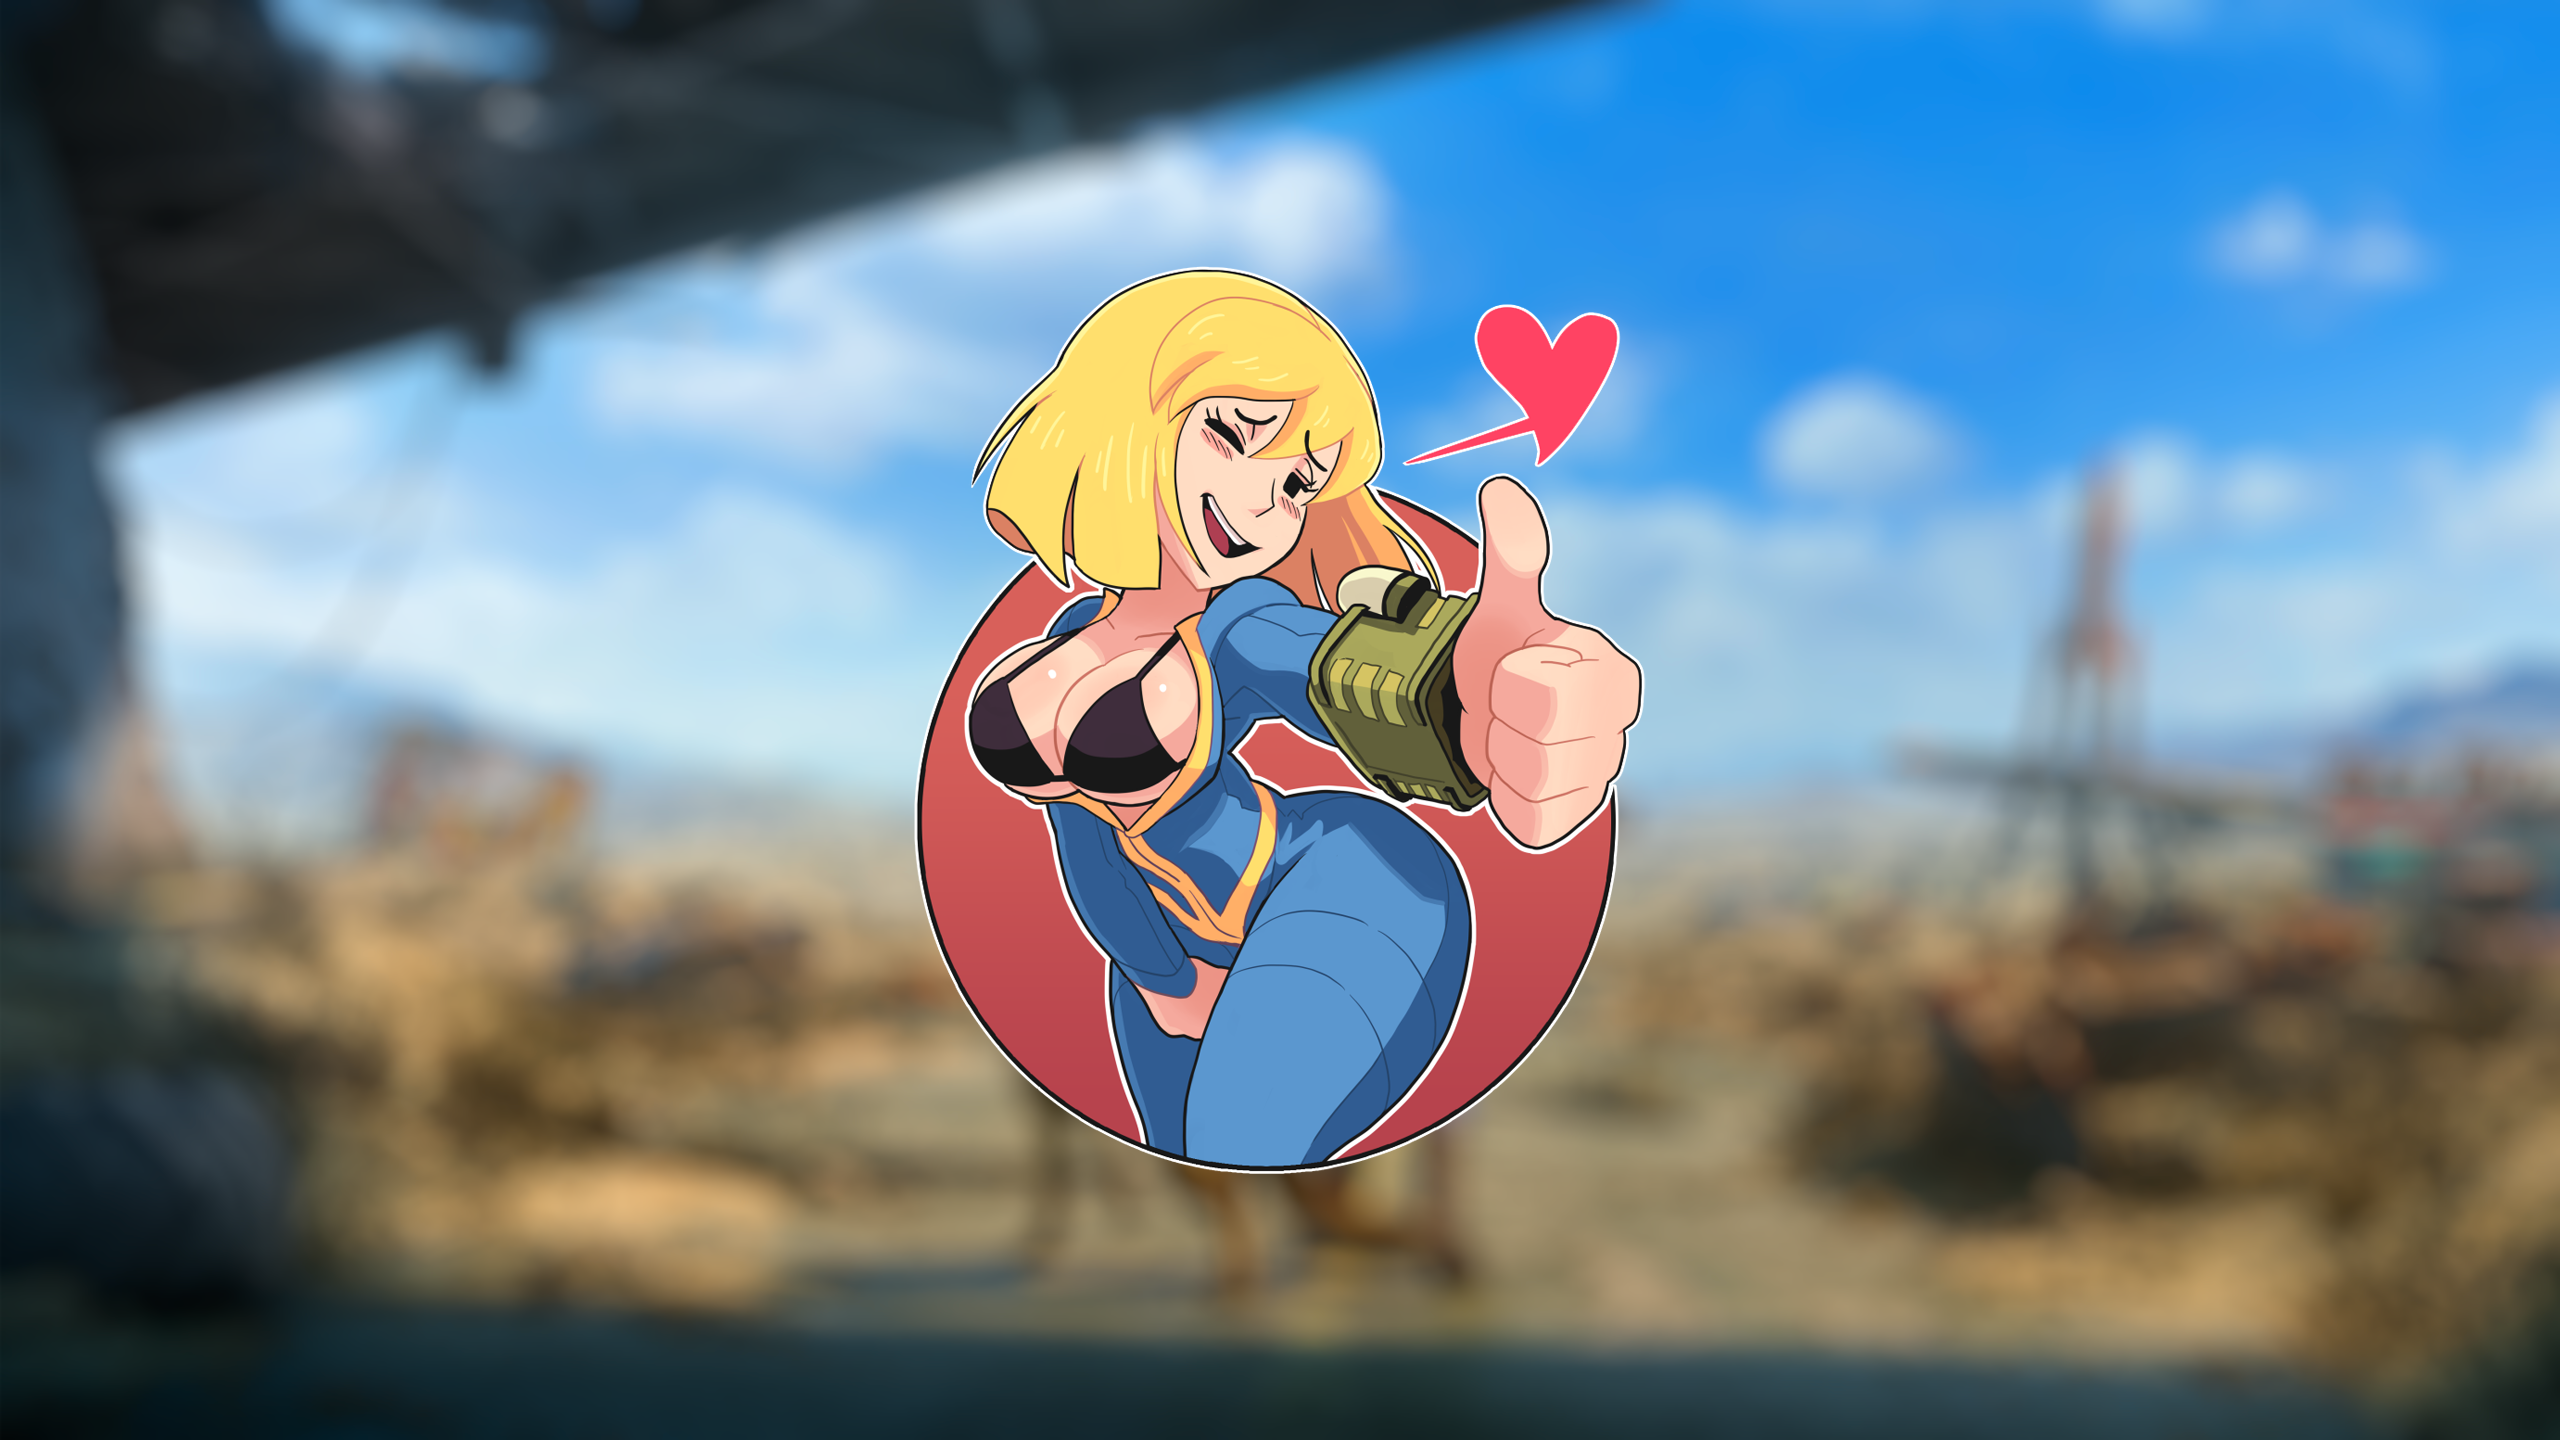 cleavage, Shadbase, big boobs, blonde, smiling, boobs, Fallout, Fallout 4,  vault girl, heart (design), video games, PC gaming